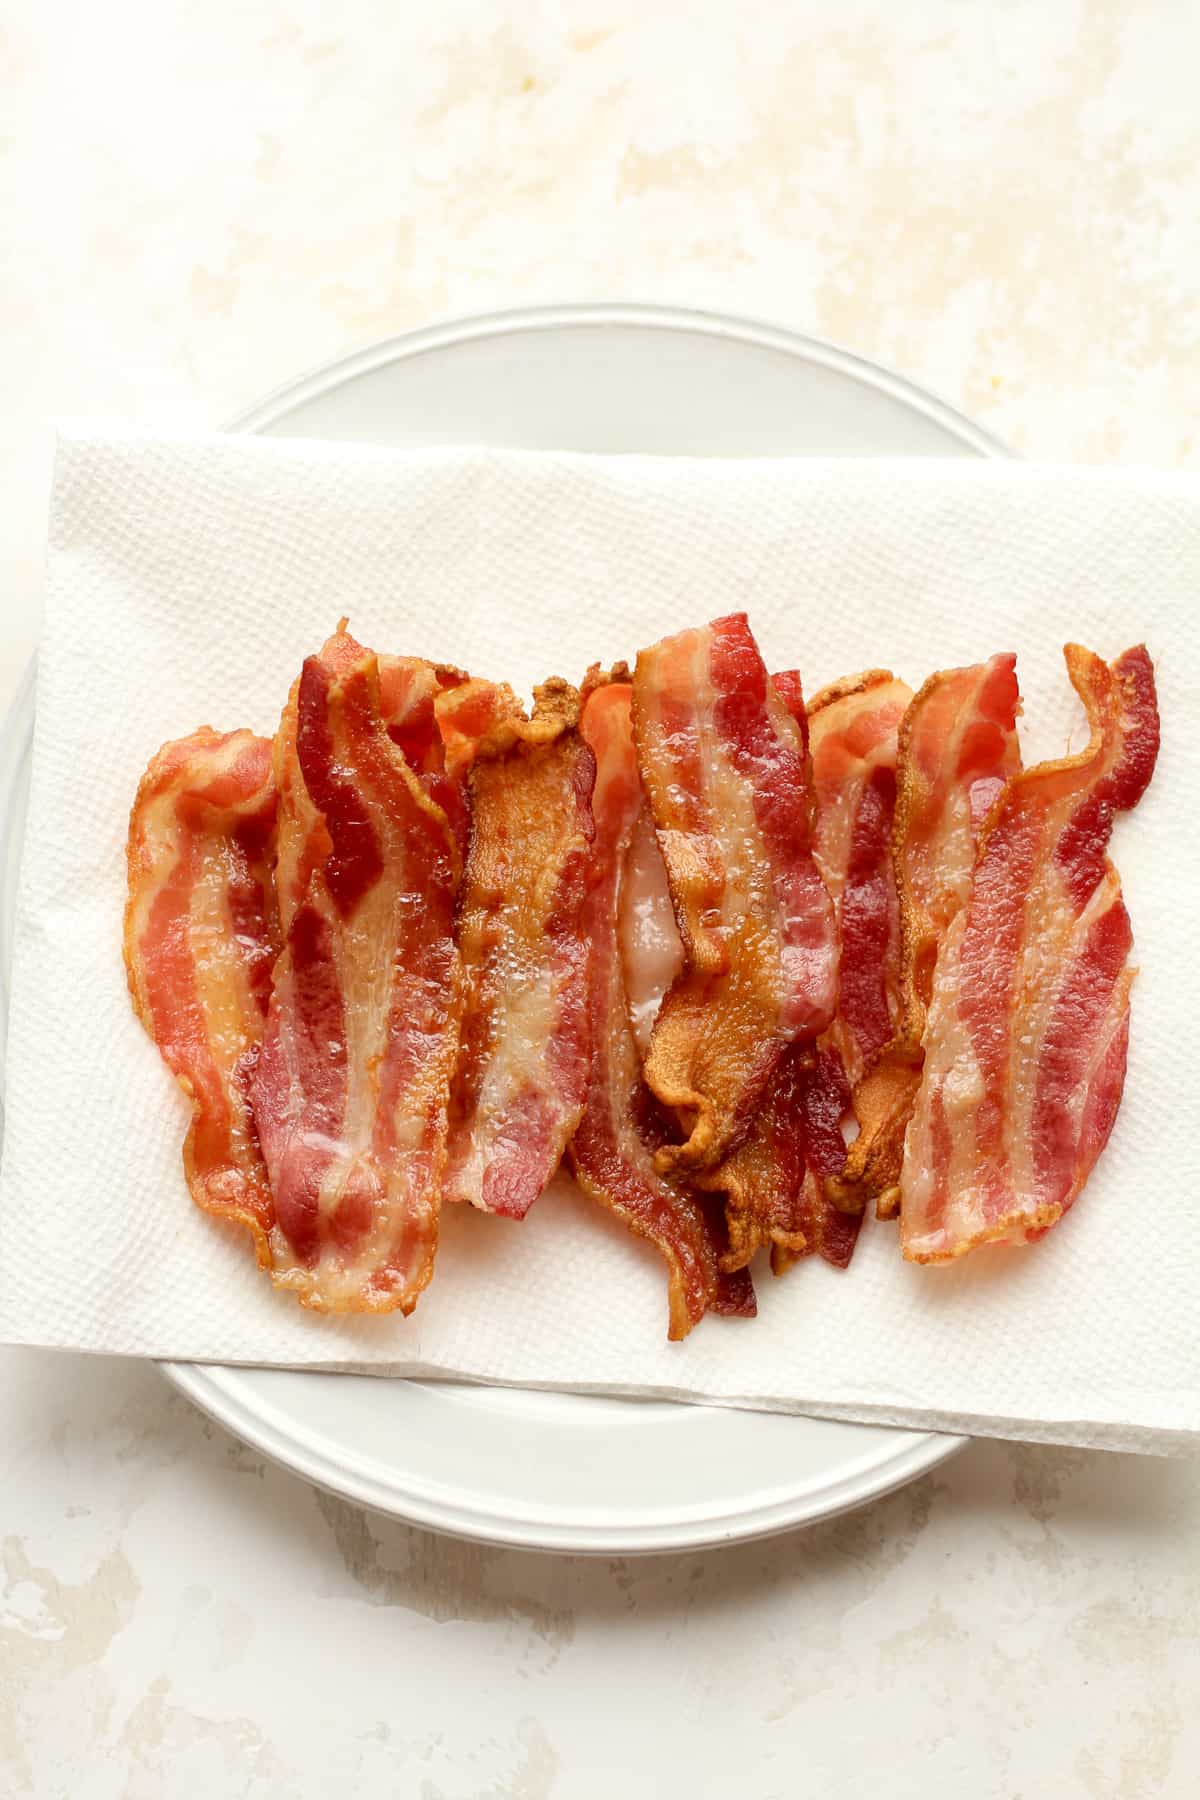 A plate of the cooked bacon on paper towel.